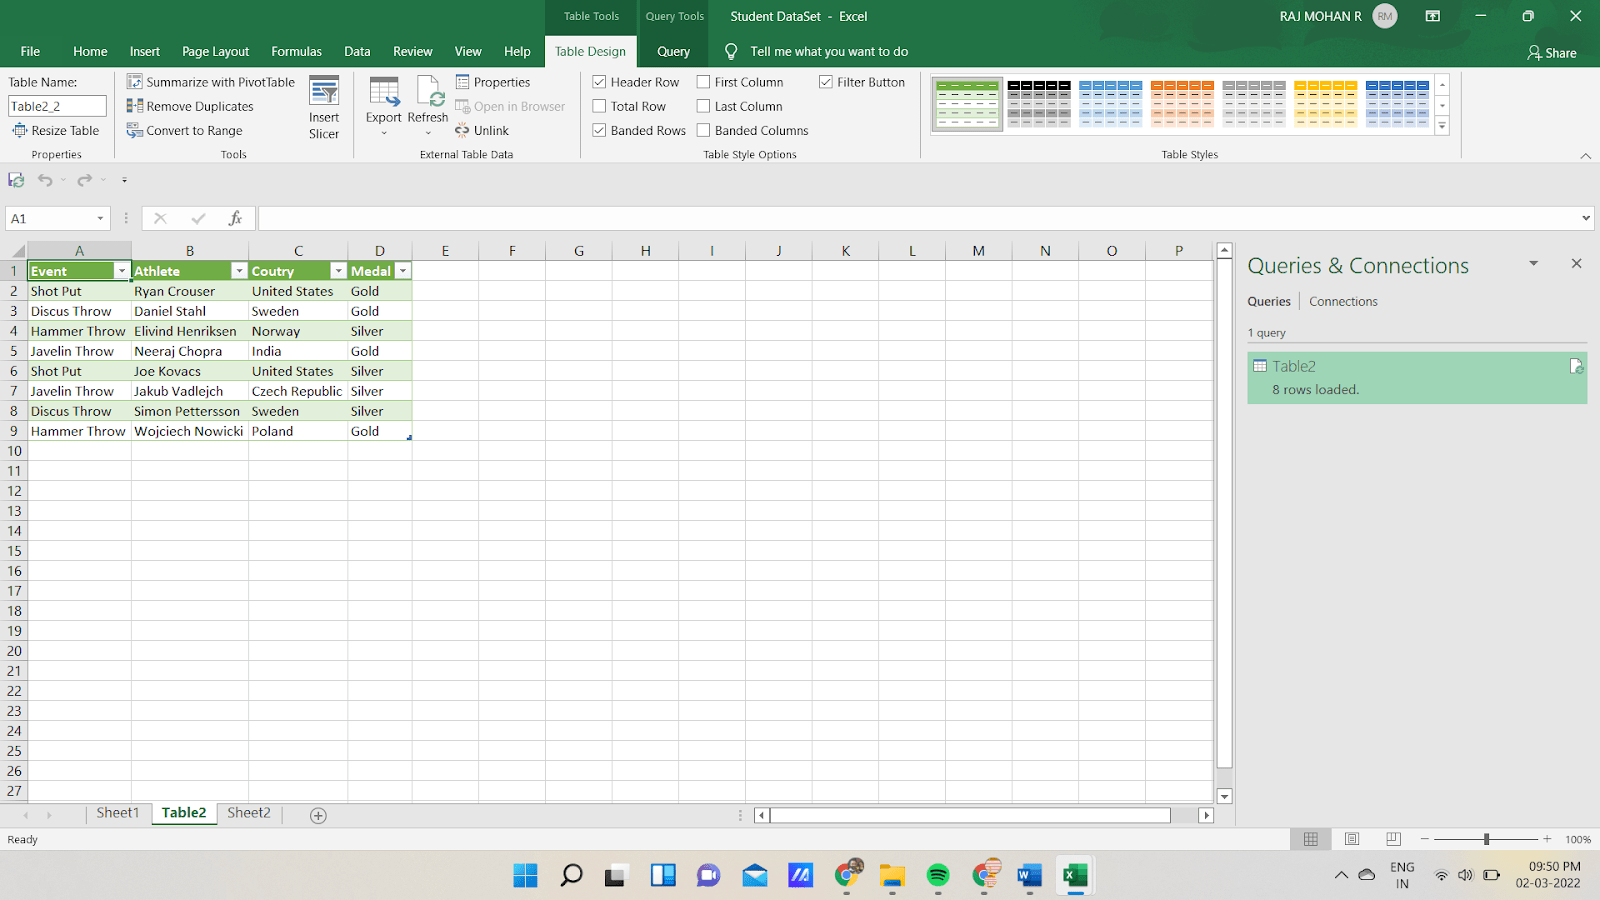 In The End, The Spreadsheet Will Look Like This,